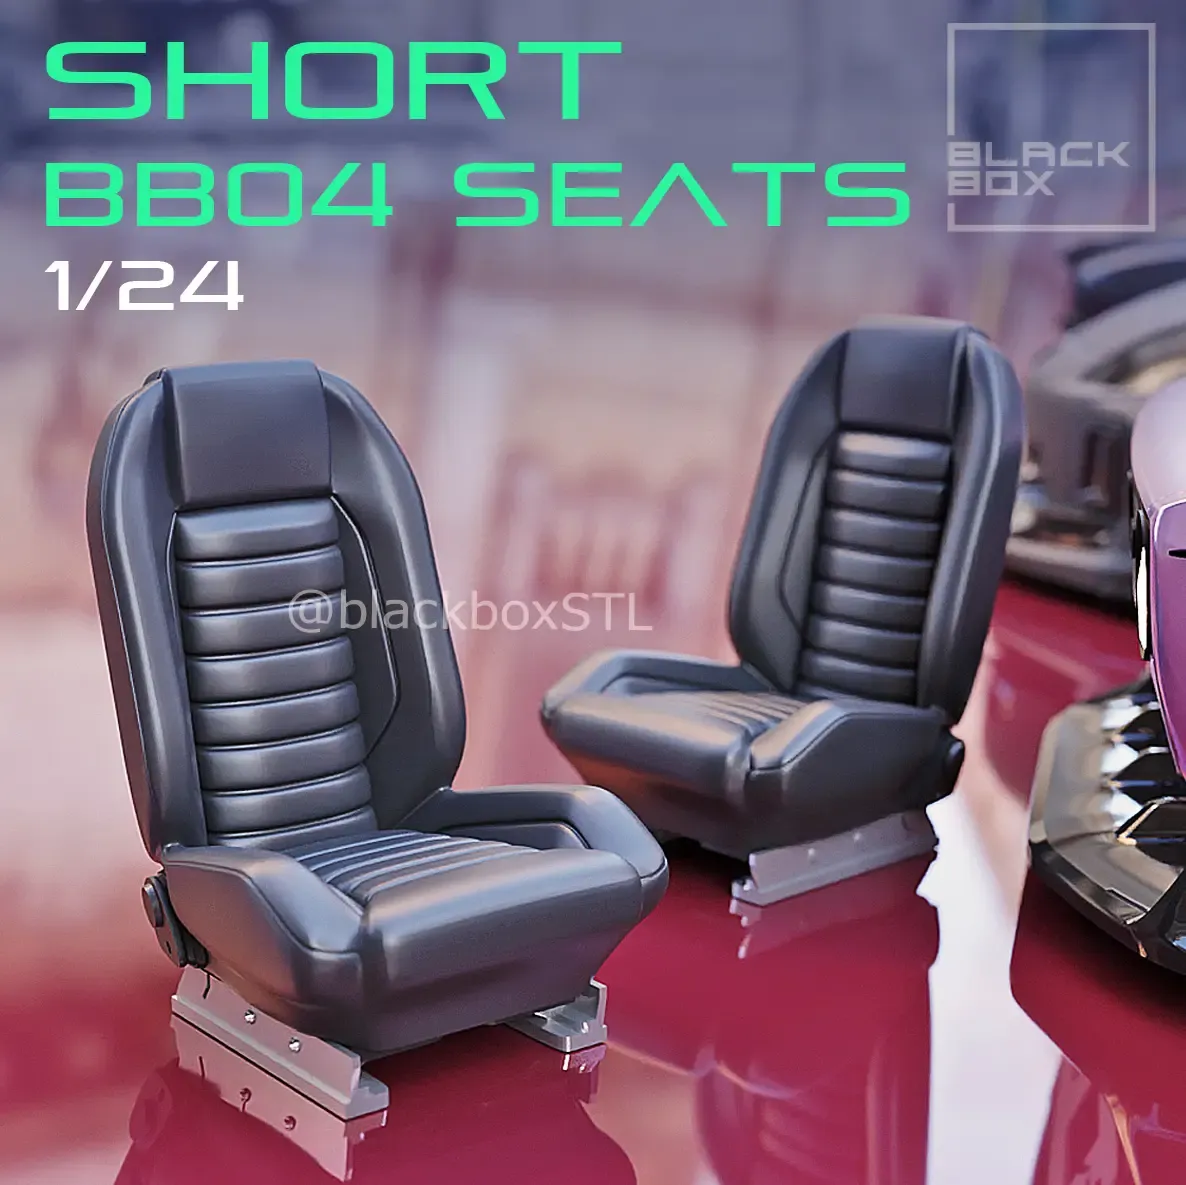 SHORT SEAT BB04 FOR DIECAST AND MODELKITS 1-24TH